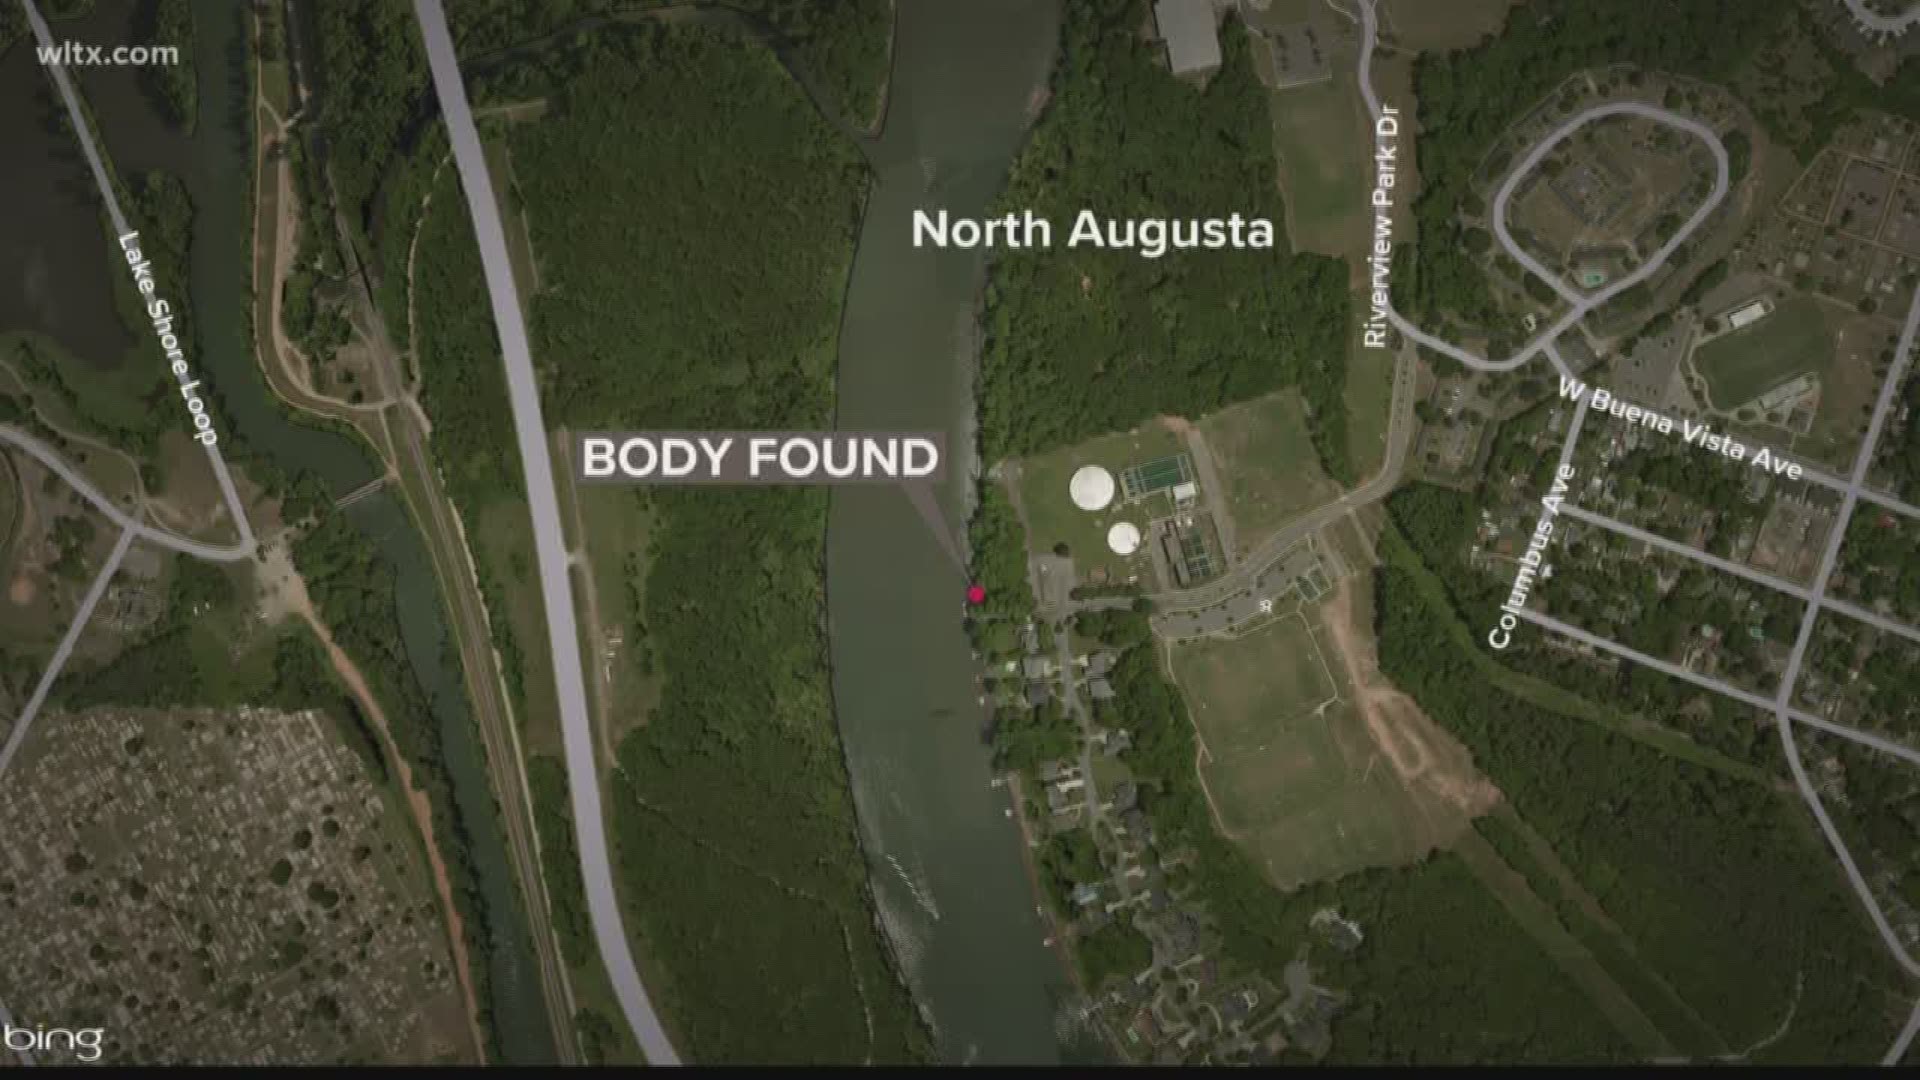 DNR says three divers recovered the body from inside a submerged car at the Hammond's Ferry boat ramp in North Augusta.